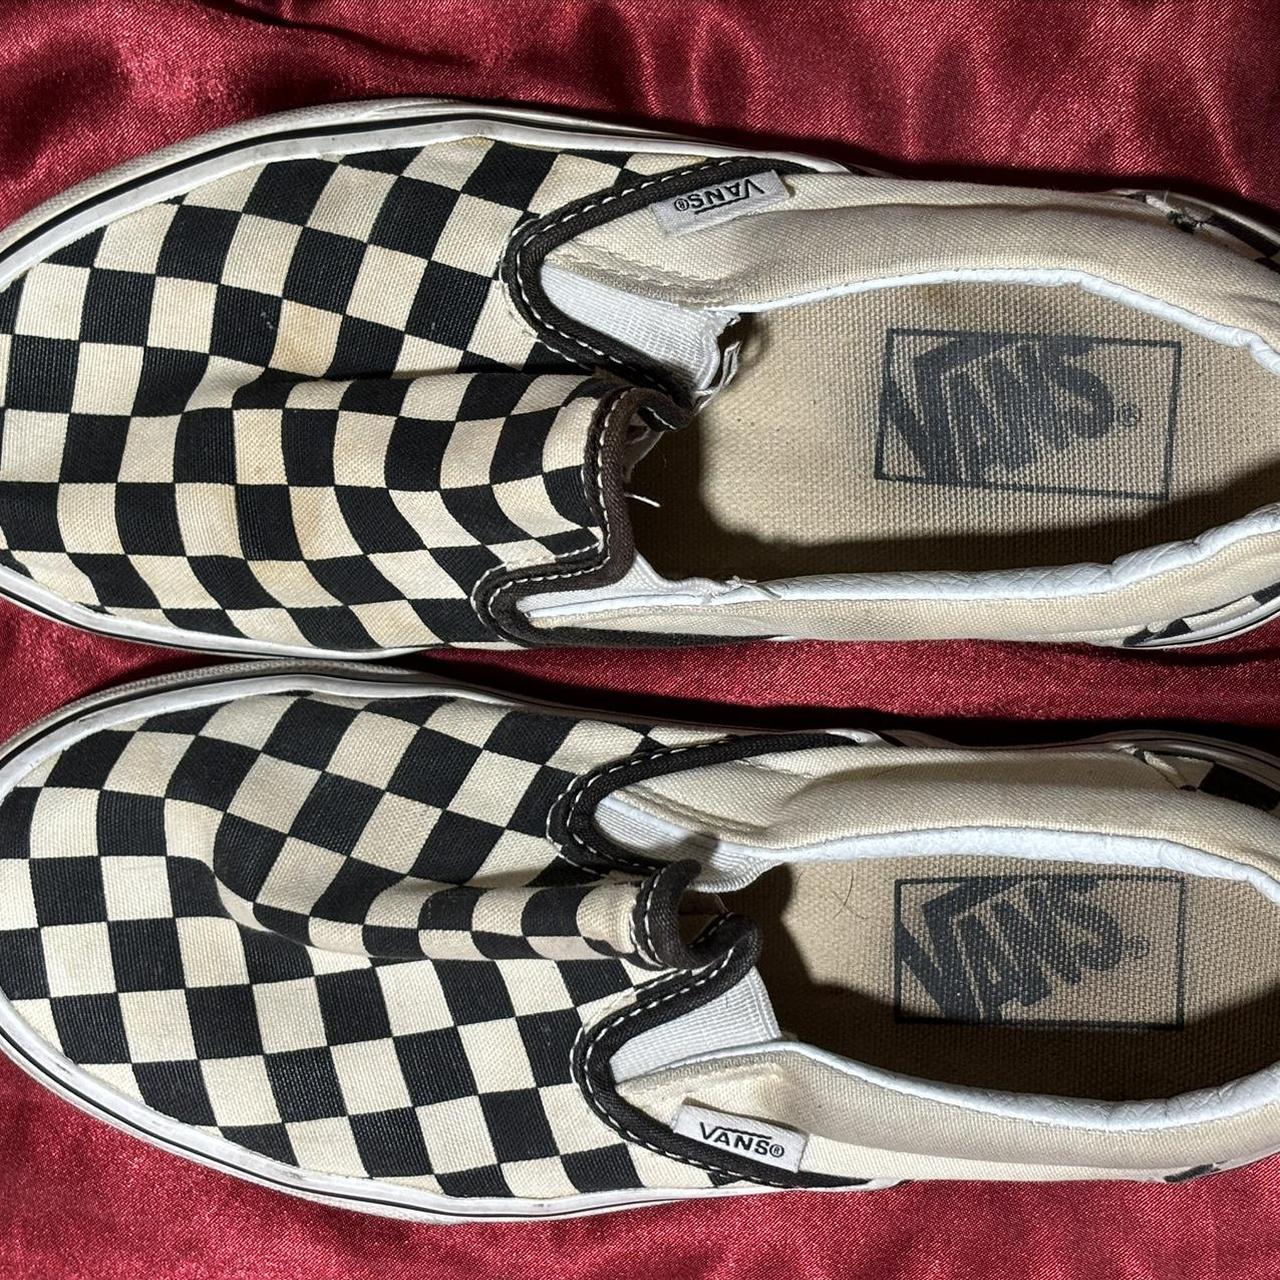 Vans Women's Black and White Trainers (2)